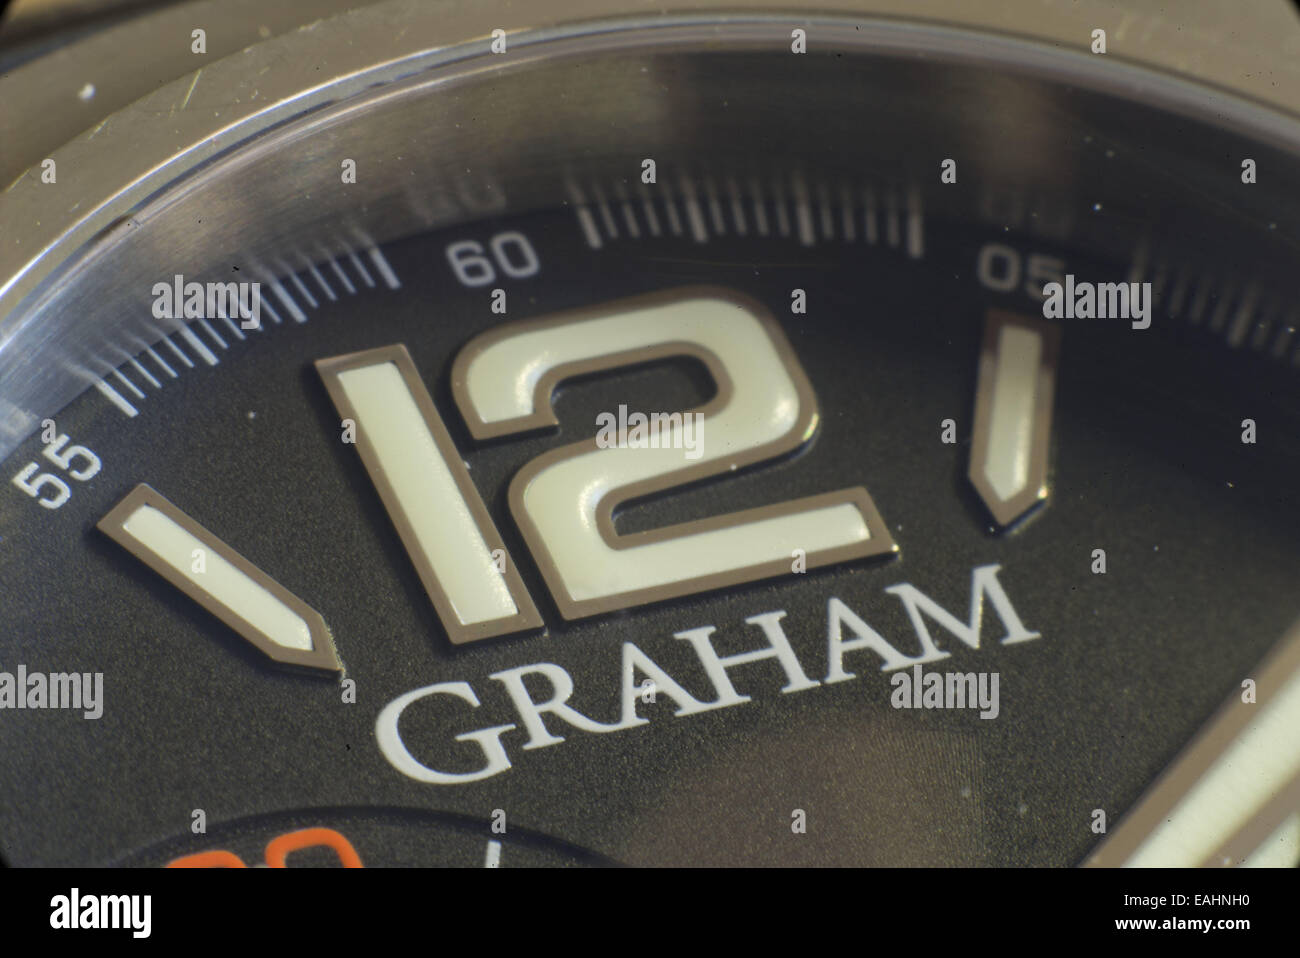 Los Angeles, CALIFORNIA, USA. 16th Nov, 2014. Picture of a Graham Watch on Saturday 15 November 2014. Graham is an unrepentantly English name for an exquisitely English watch. If you're interested in the minutiae of watch making, Graham was the surname of George Graham, born in 1673, master watchmaker who lived in Fleet Street in London.ARMANDO ARORIZO. © Armando Arorizo/Prensa Internacional/ZUMA Wire/Alamy Live News Stock Photo